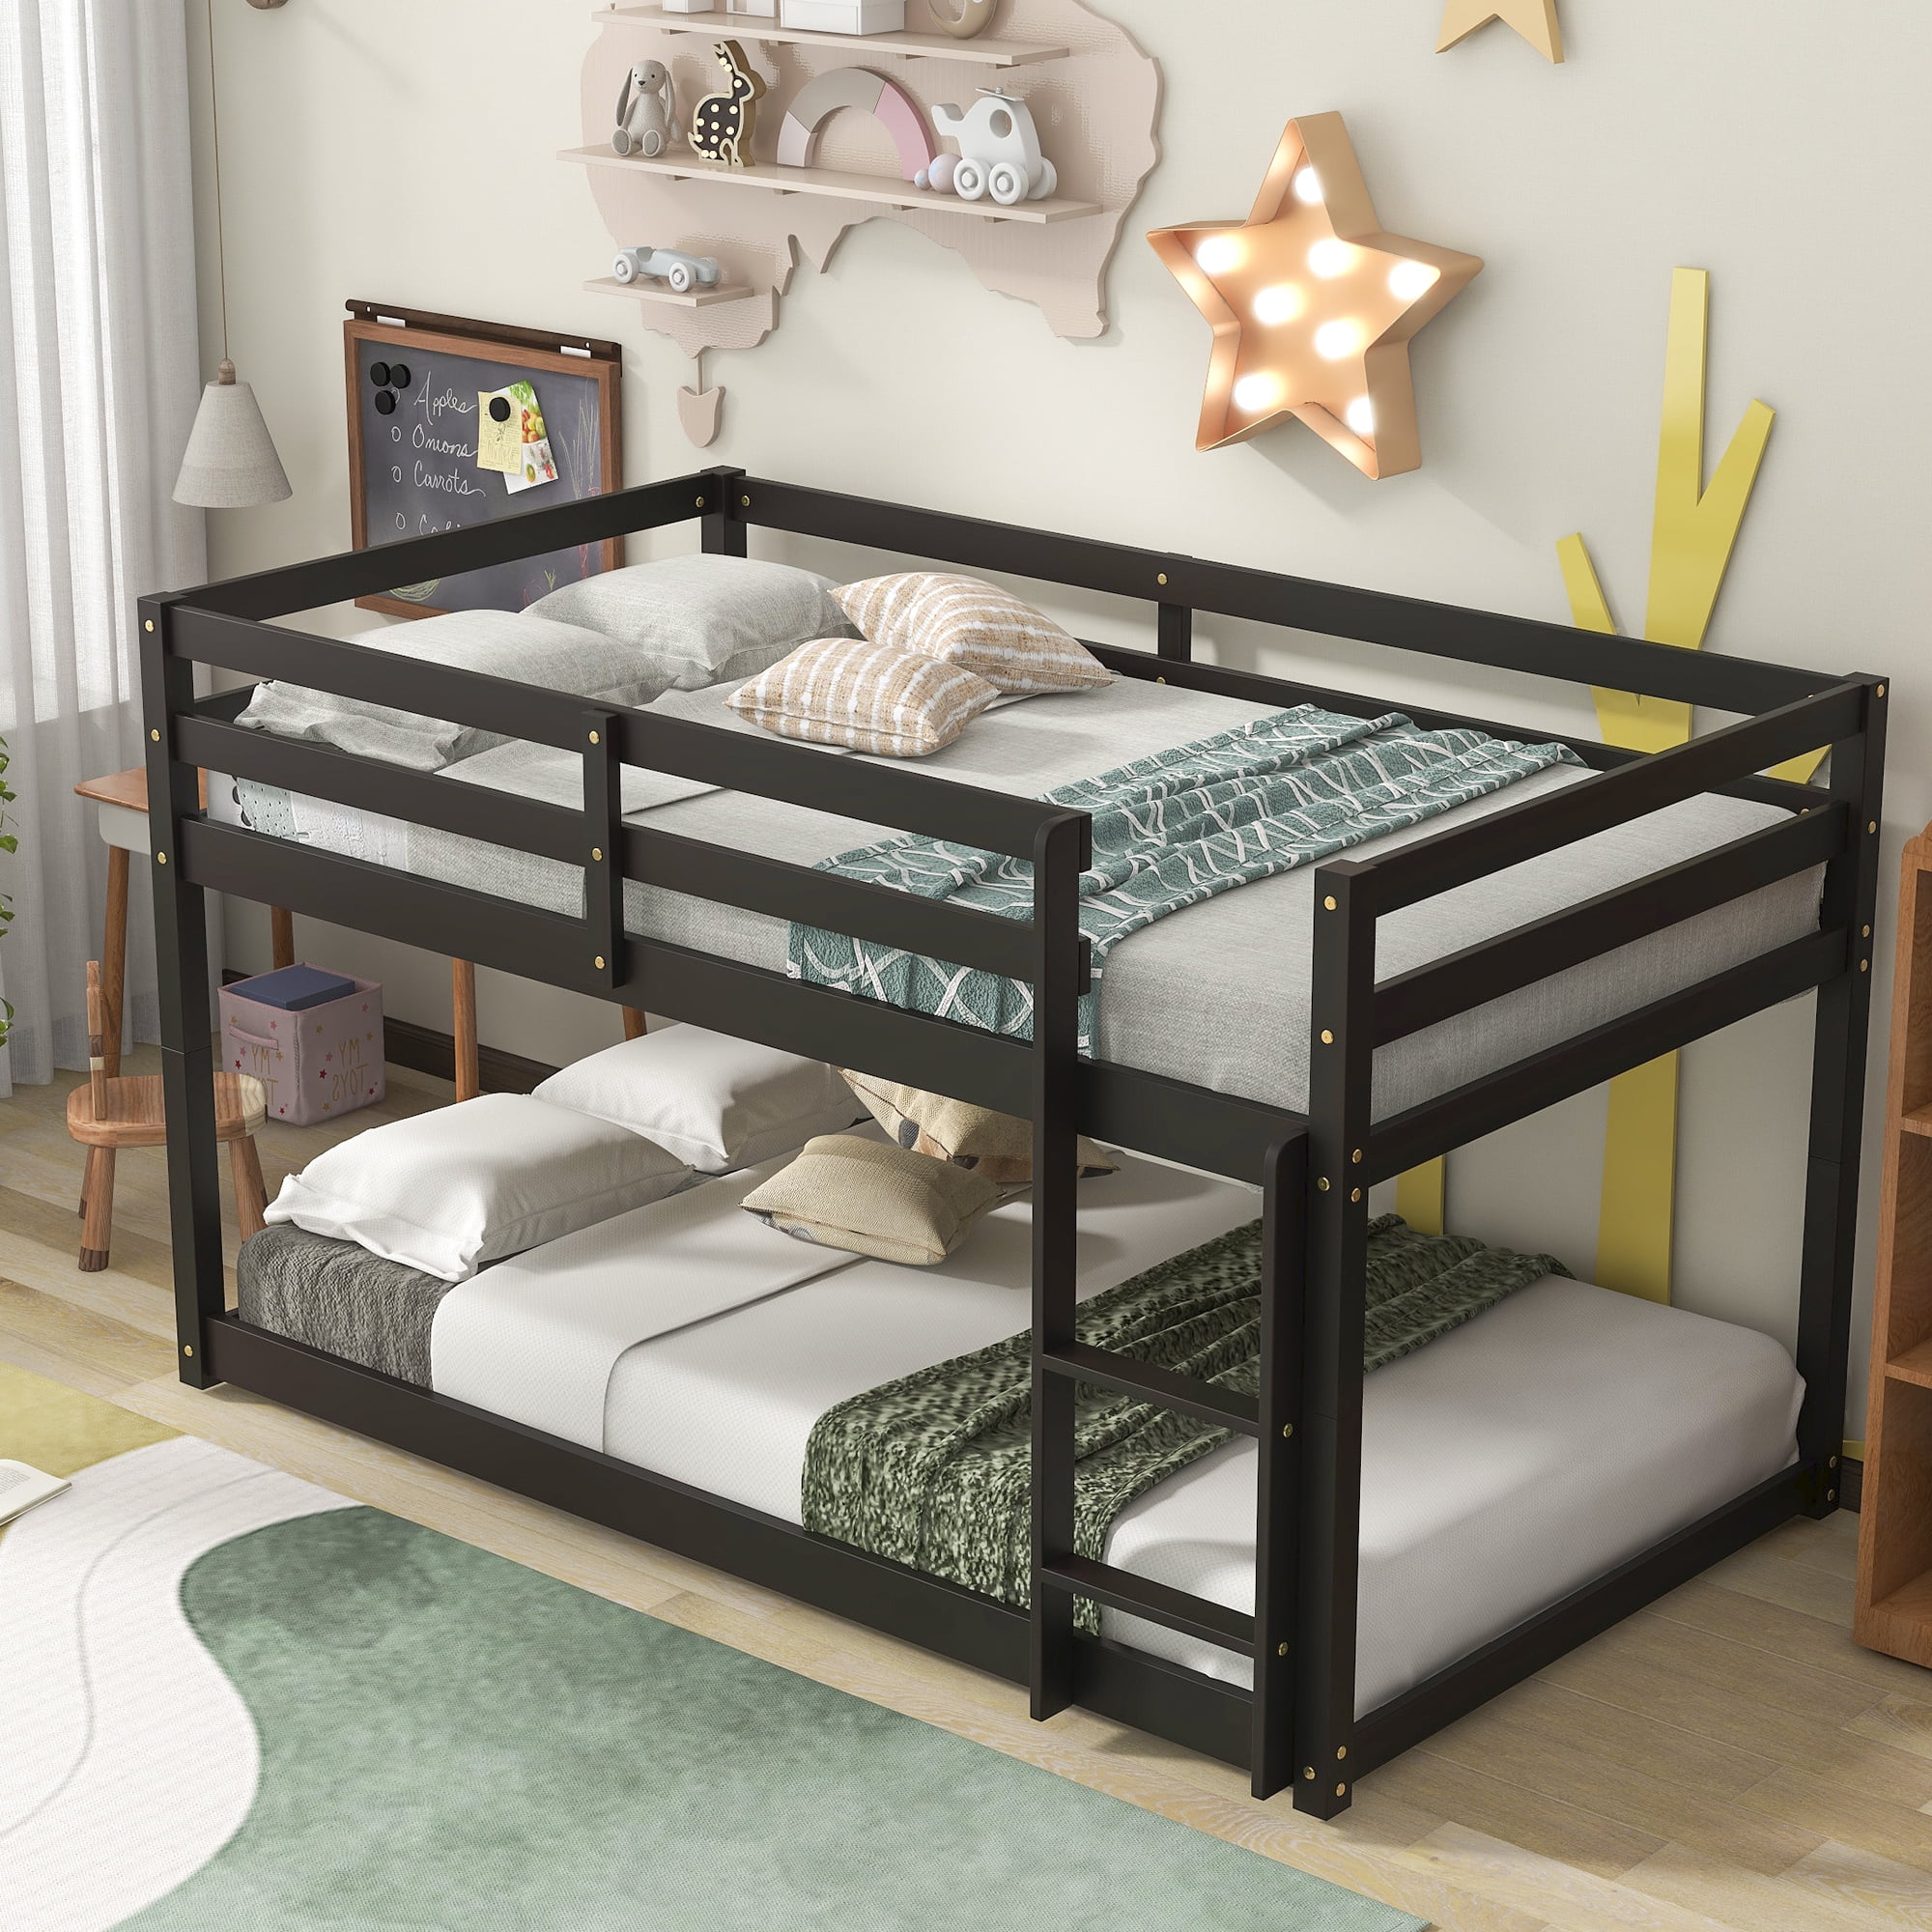 Wood Bunk Bed Twin Over Twin Size Espresso Kids Bedroom Furniture Boys Girls New 